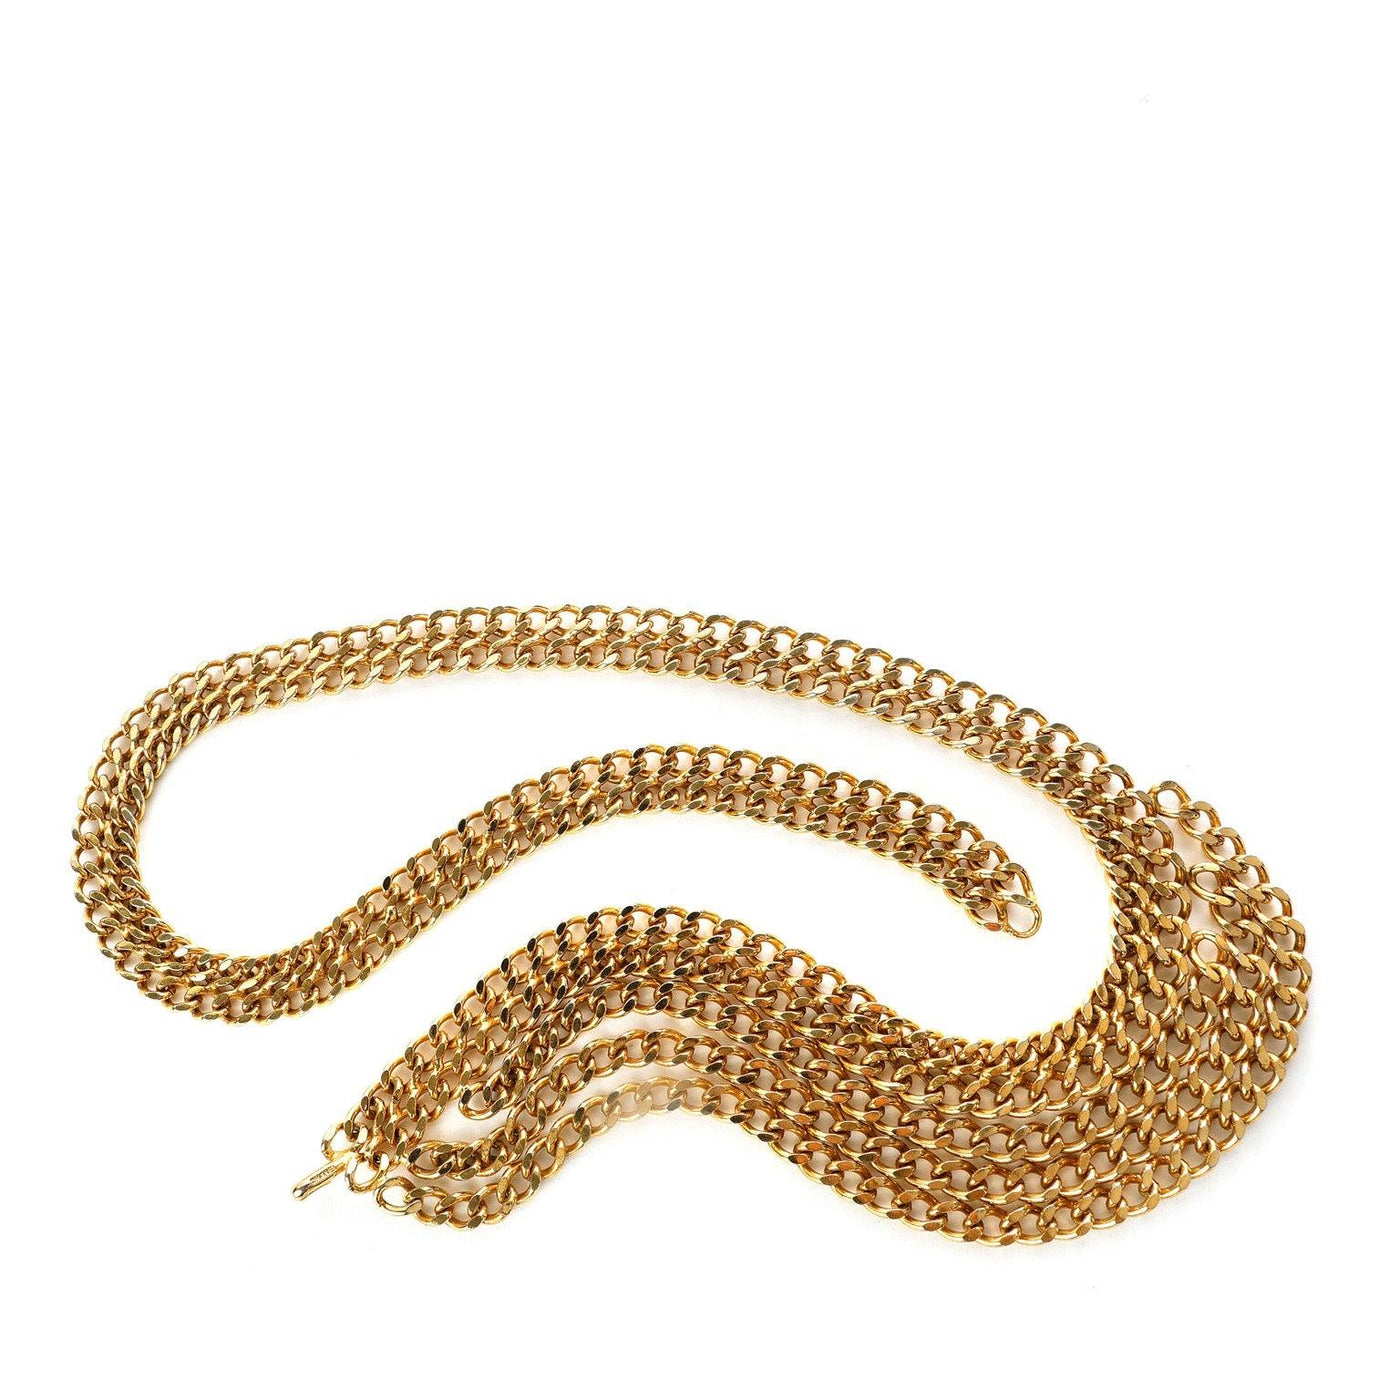 Chanel Gold Link Double Chain Belt - Only Authentics